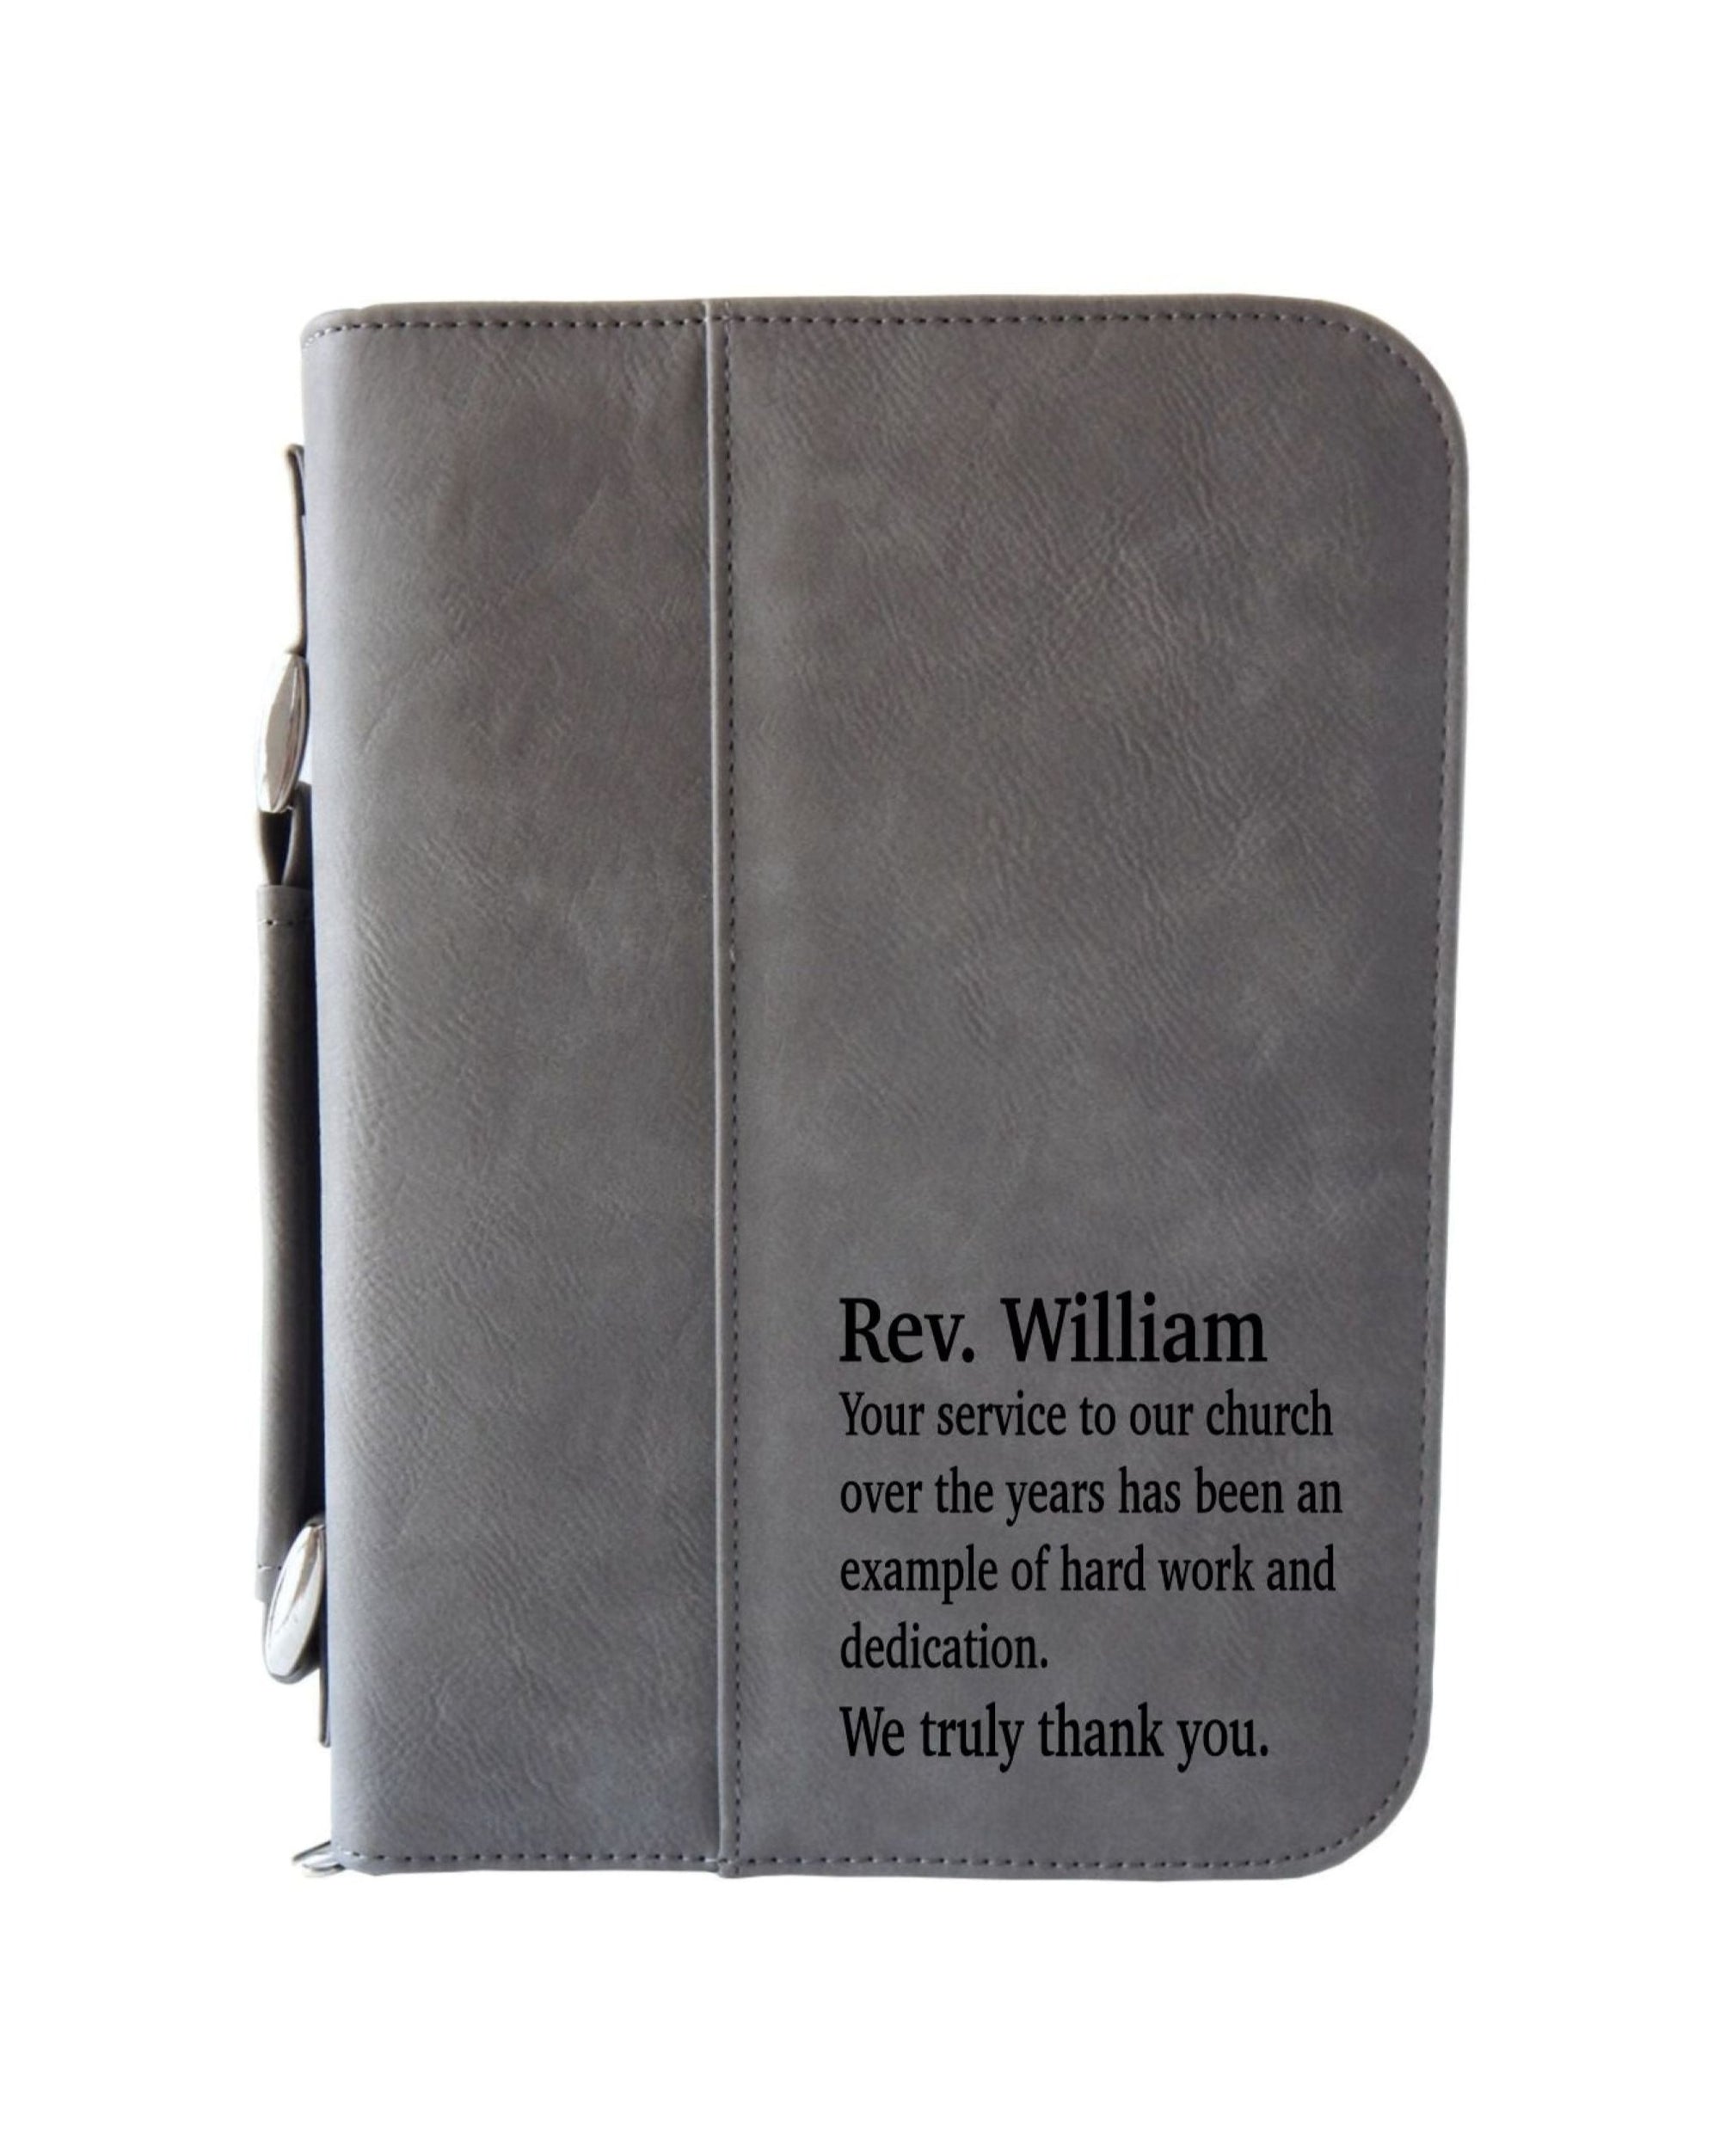 Religious Gift for Pastor | Engraved Bible Covers | Cases with Handle and Zipper, BCL039